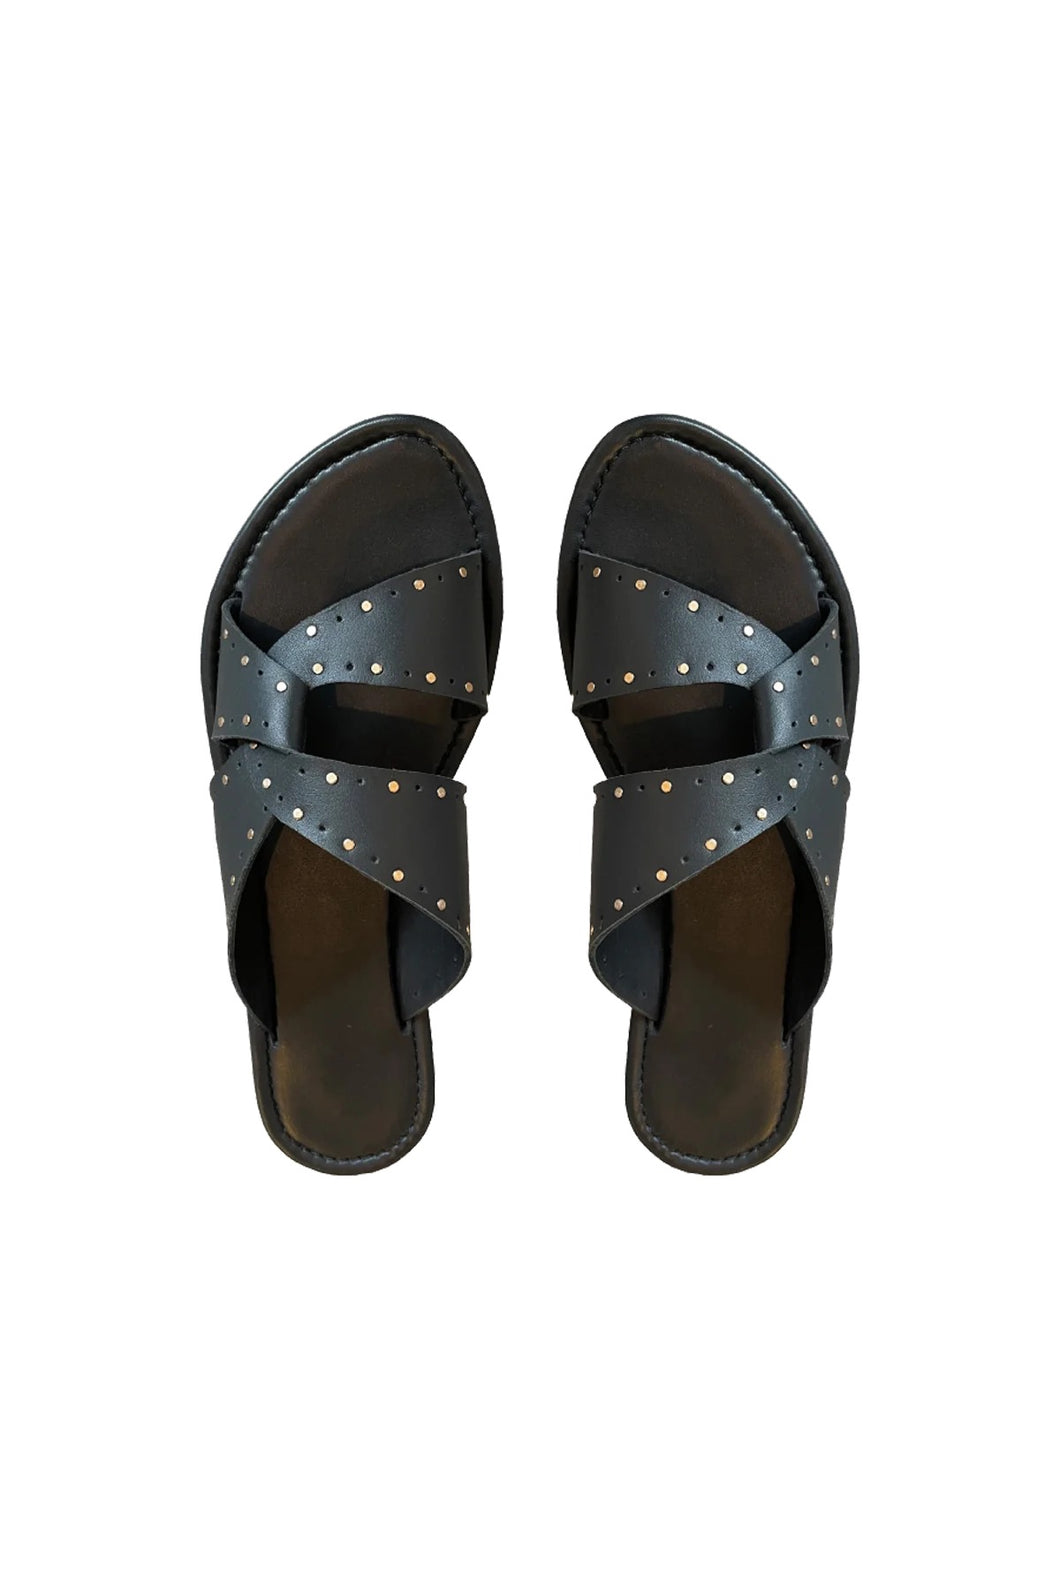 Ruby Tuesday Savan Leather Sandals With Studs Anthracite